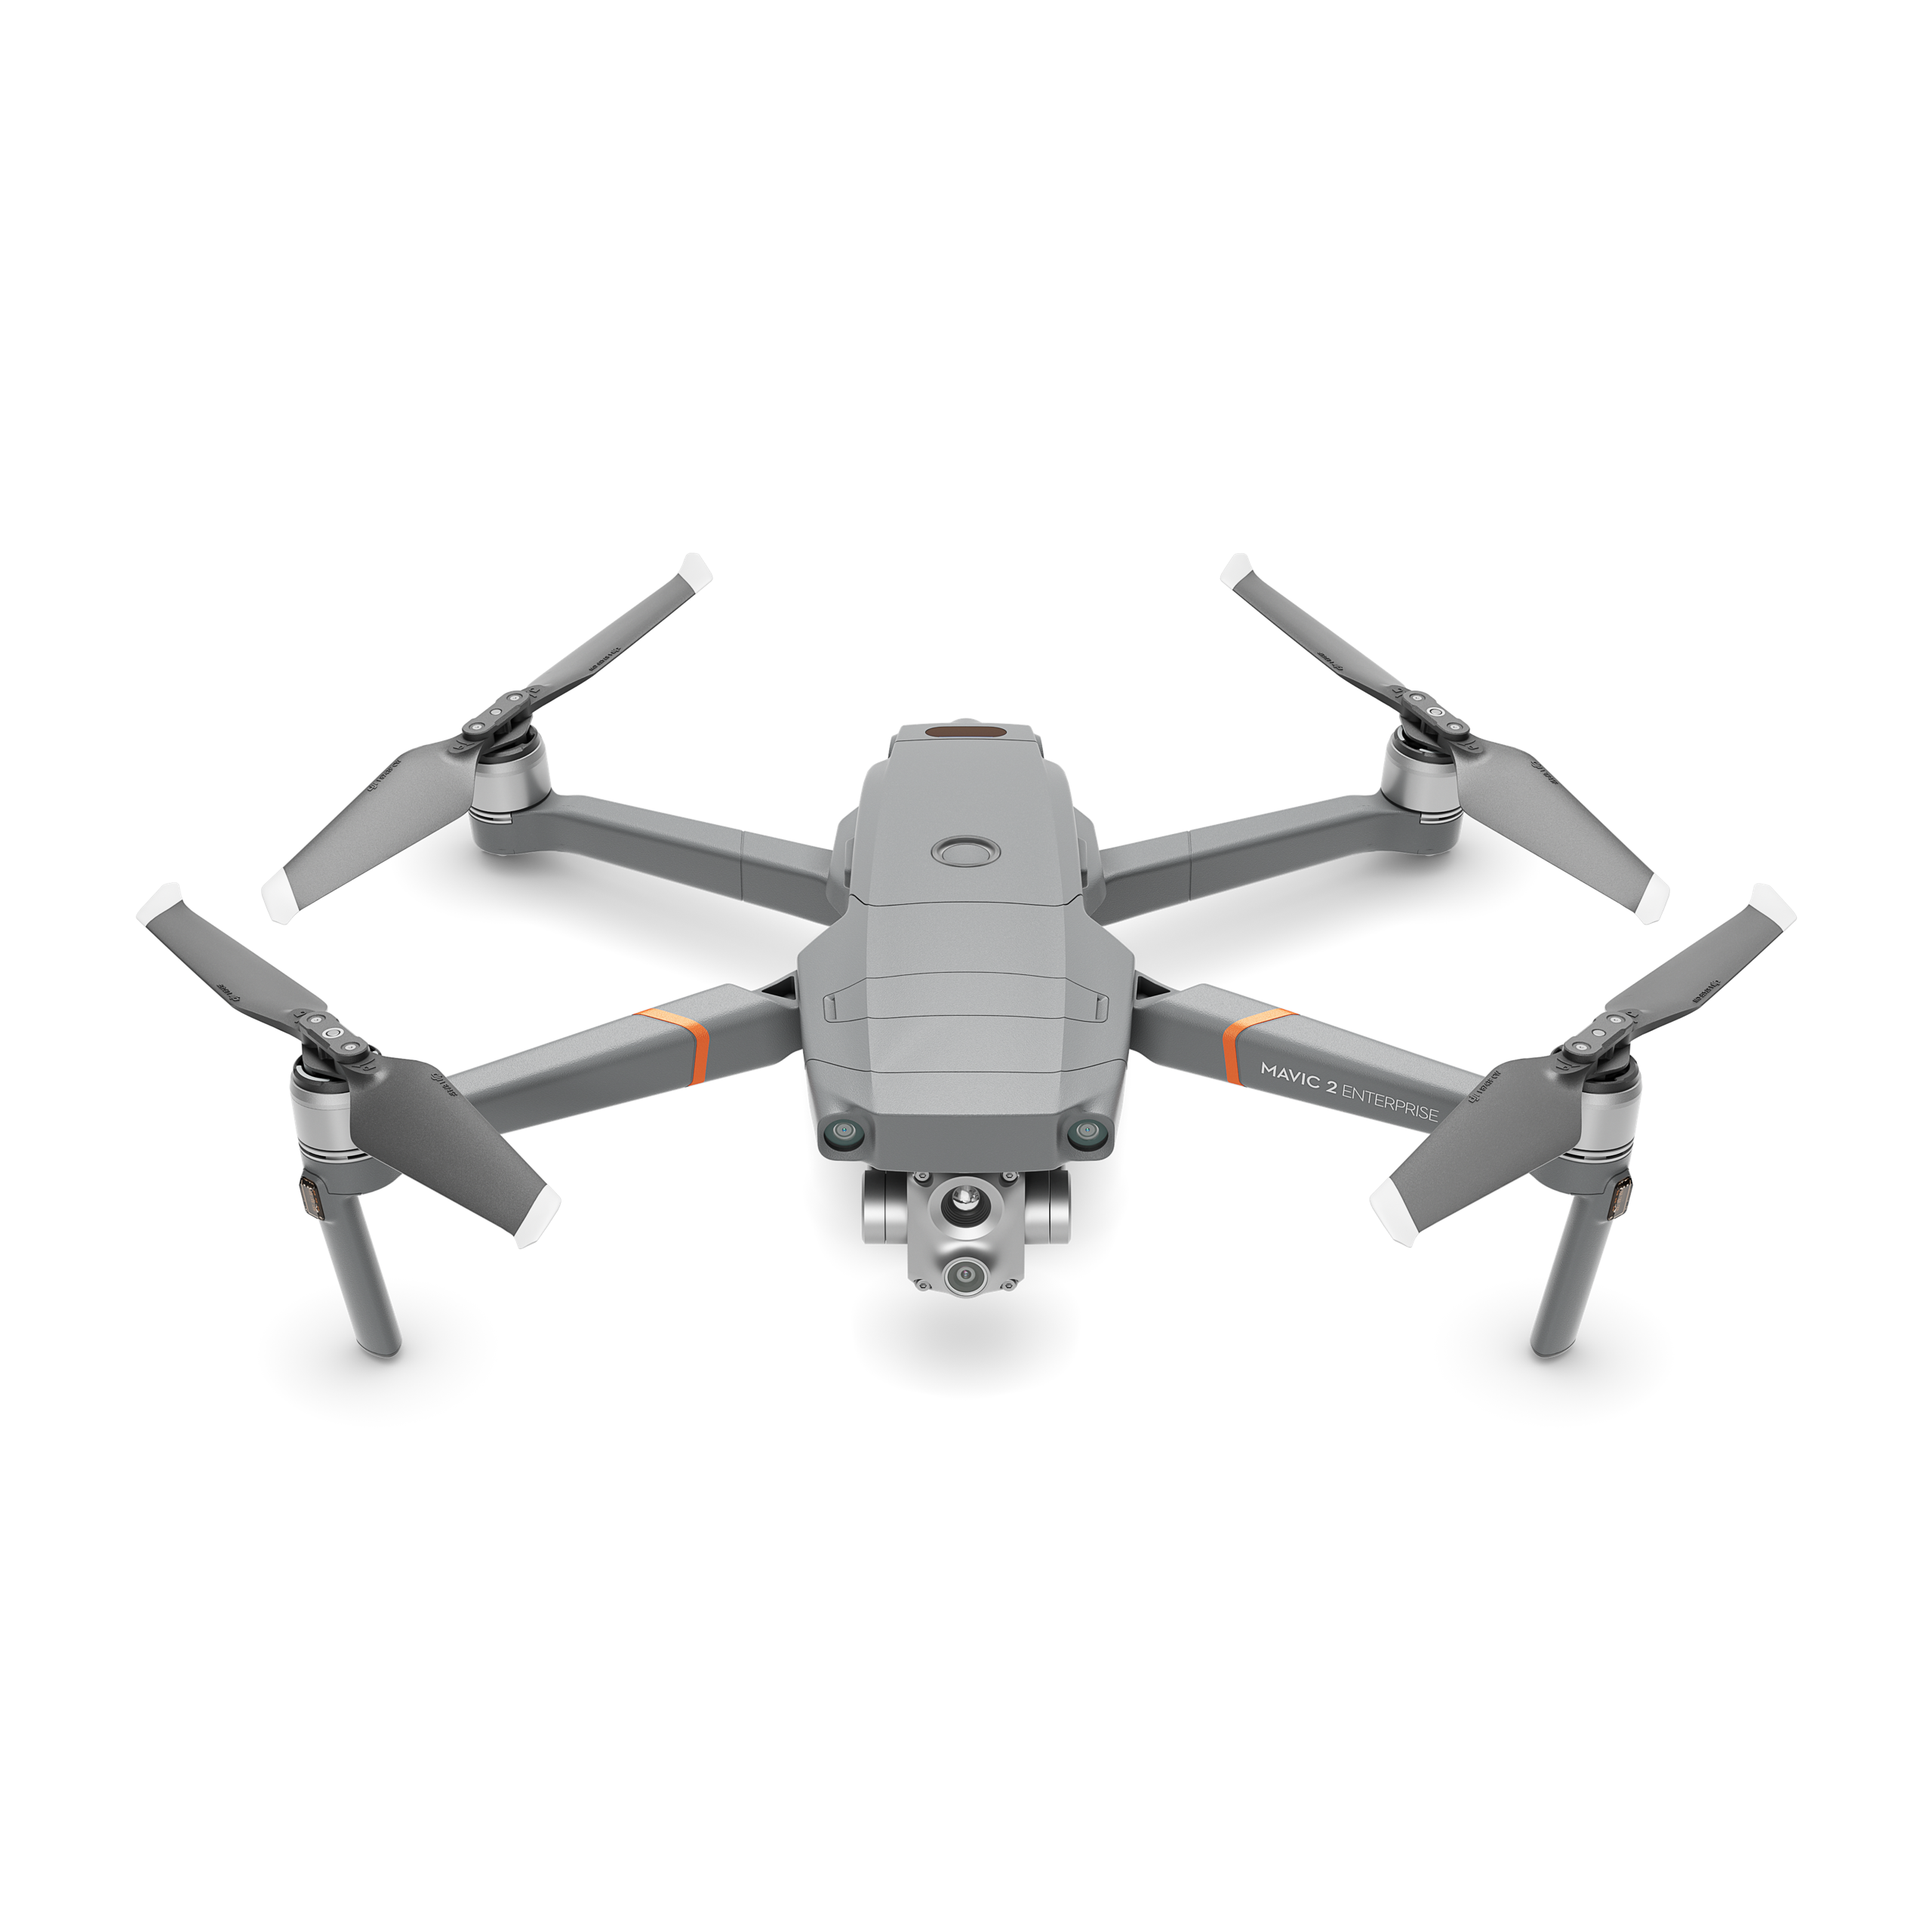 http://www.botsanddrones.biz/buy_sell_used_drones/uk/storage/app/public/product/image/1679114327Commercial.png